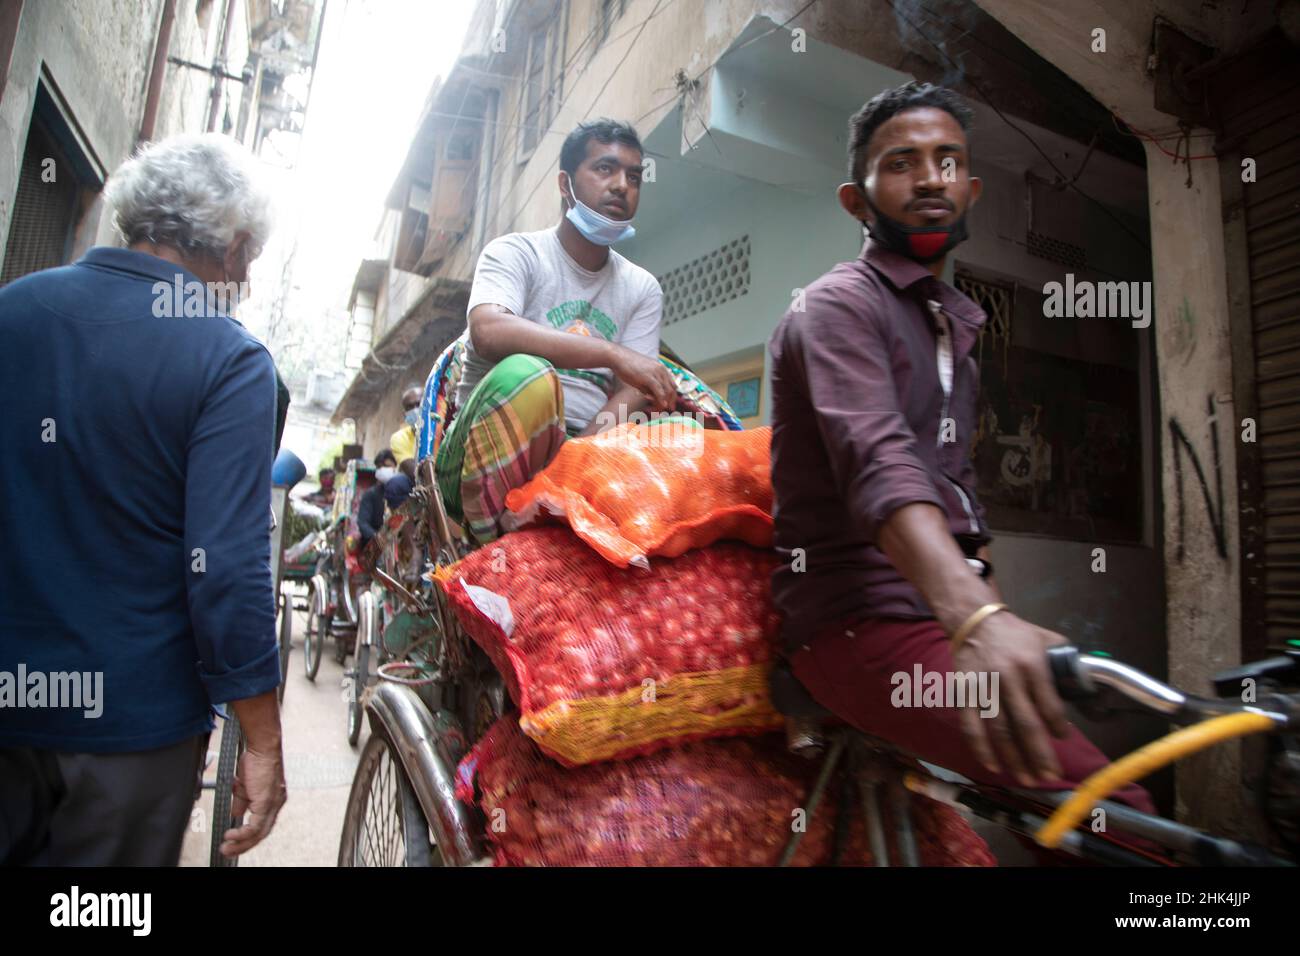 Rickshaw pullers on the streets of Puran Dhaka - Old Dhaka in Bangladesh. The rickshaws are pedal powered tricycles, but used to be pulled by hand, hence 'rickshaw puller'. Nowadays many of the rickshaws are even converted to be powered by electric motor. Stock Photo